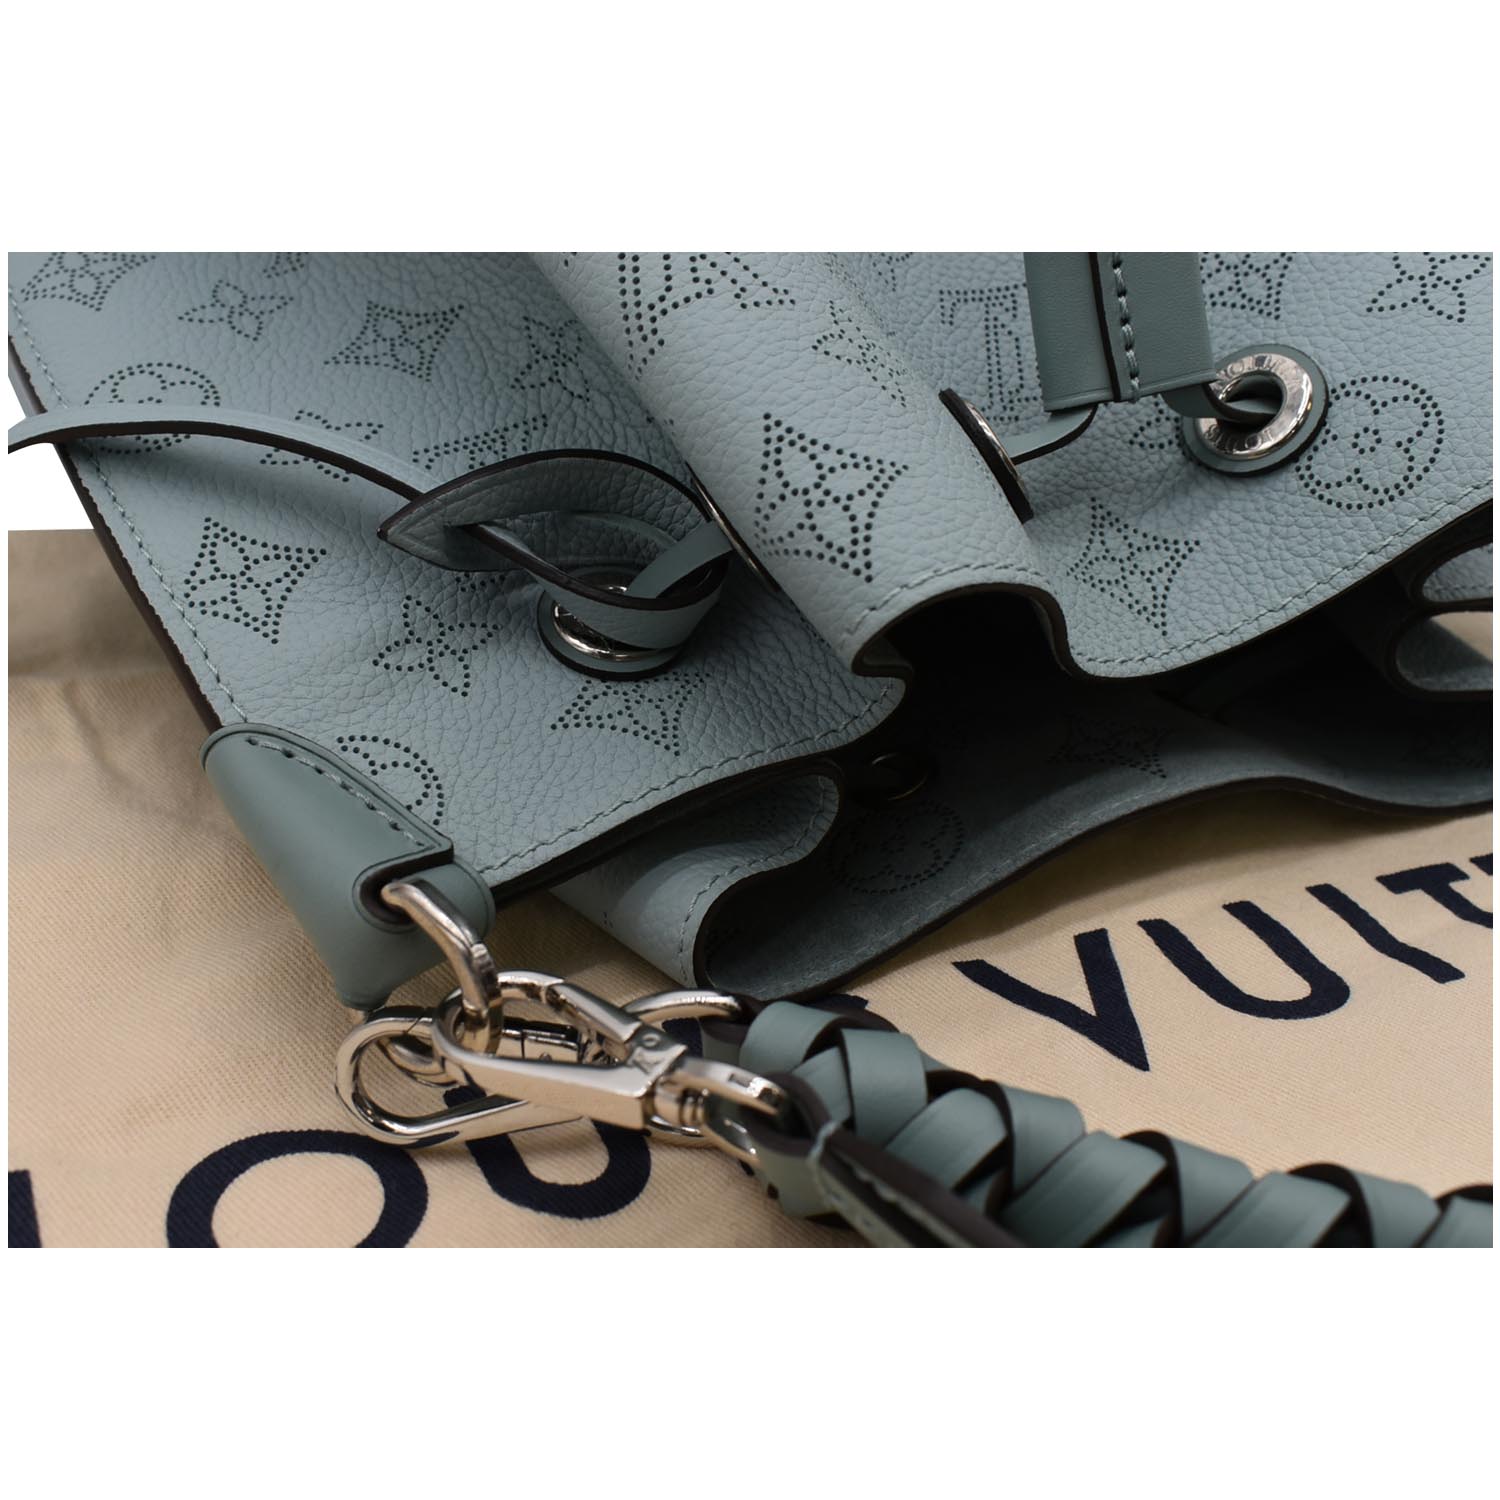 Muria leather handbag Louis Vuitton Grey in Leather - 33633971